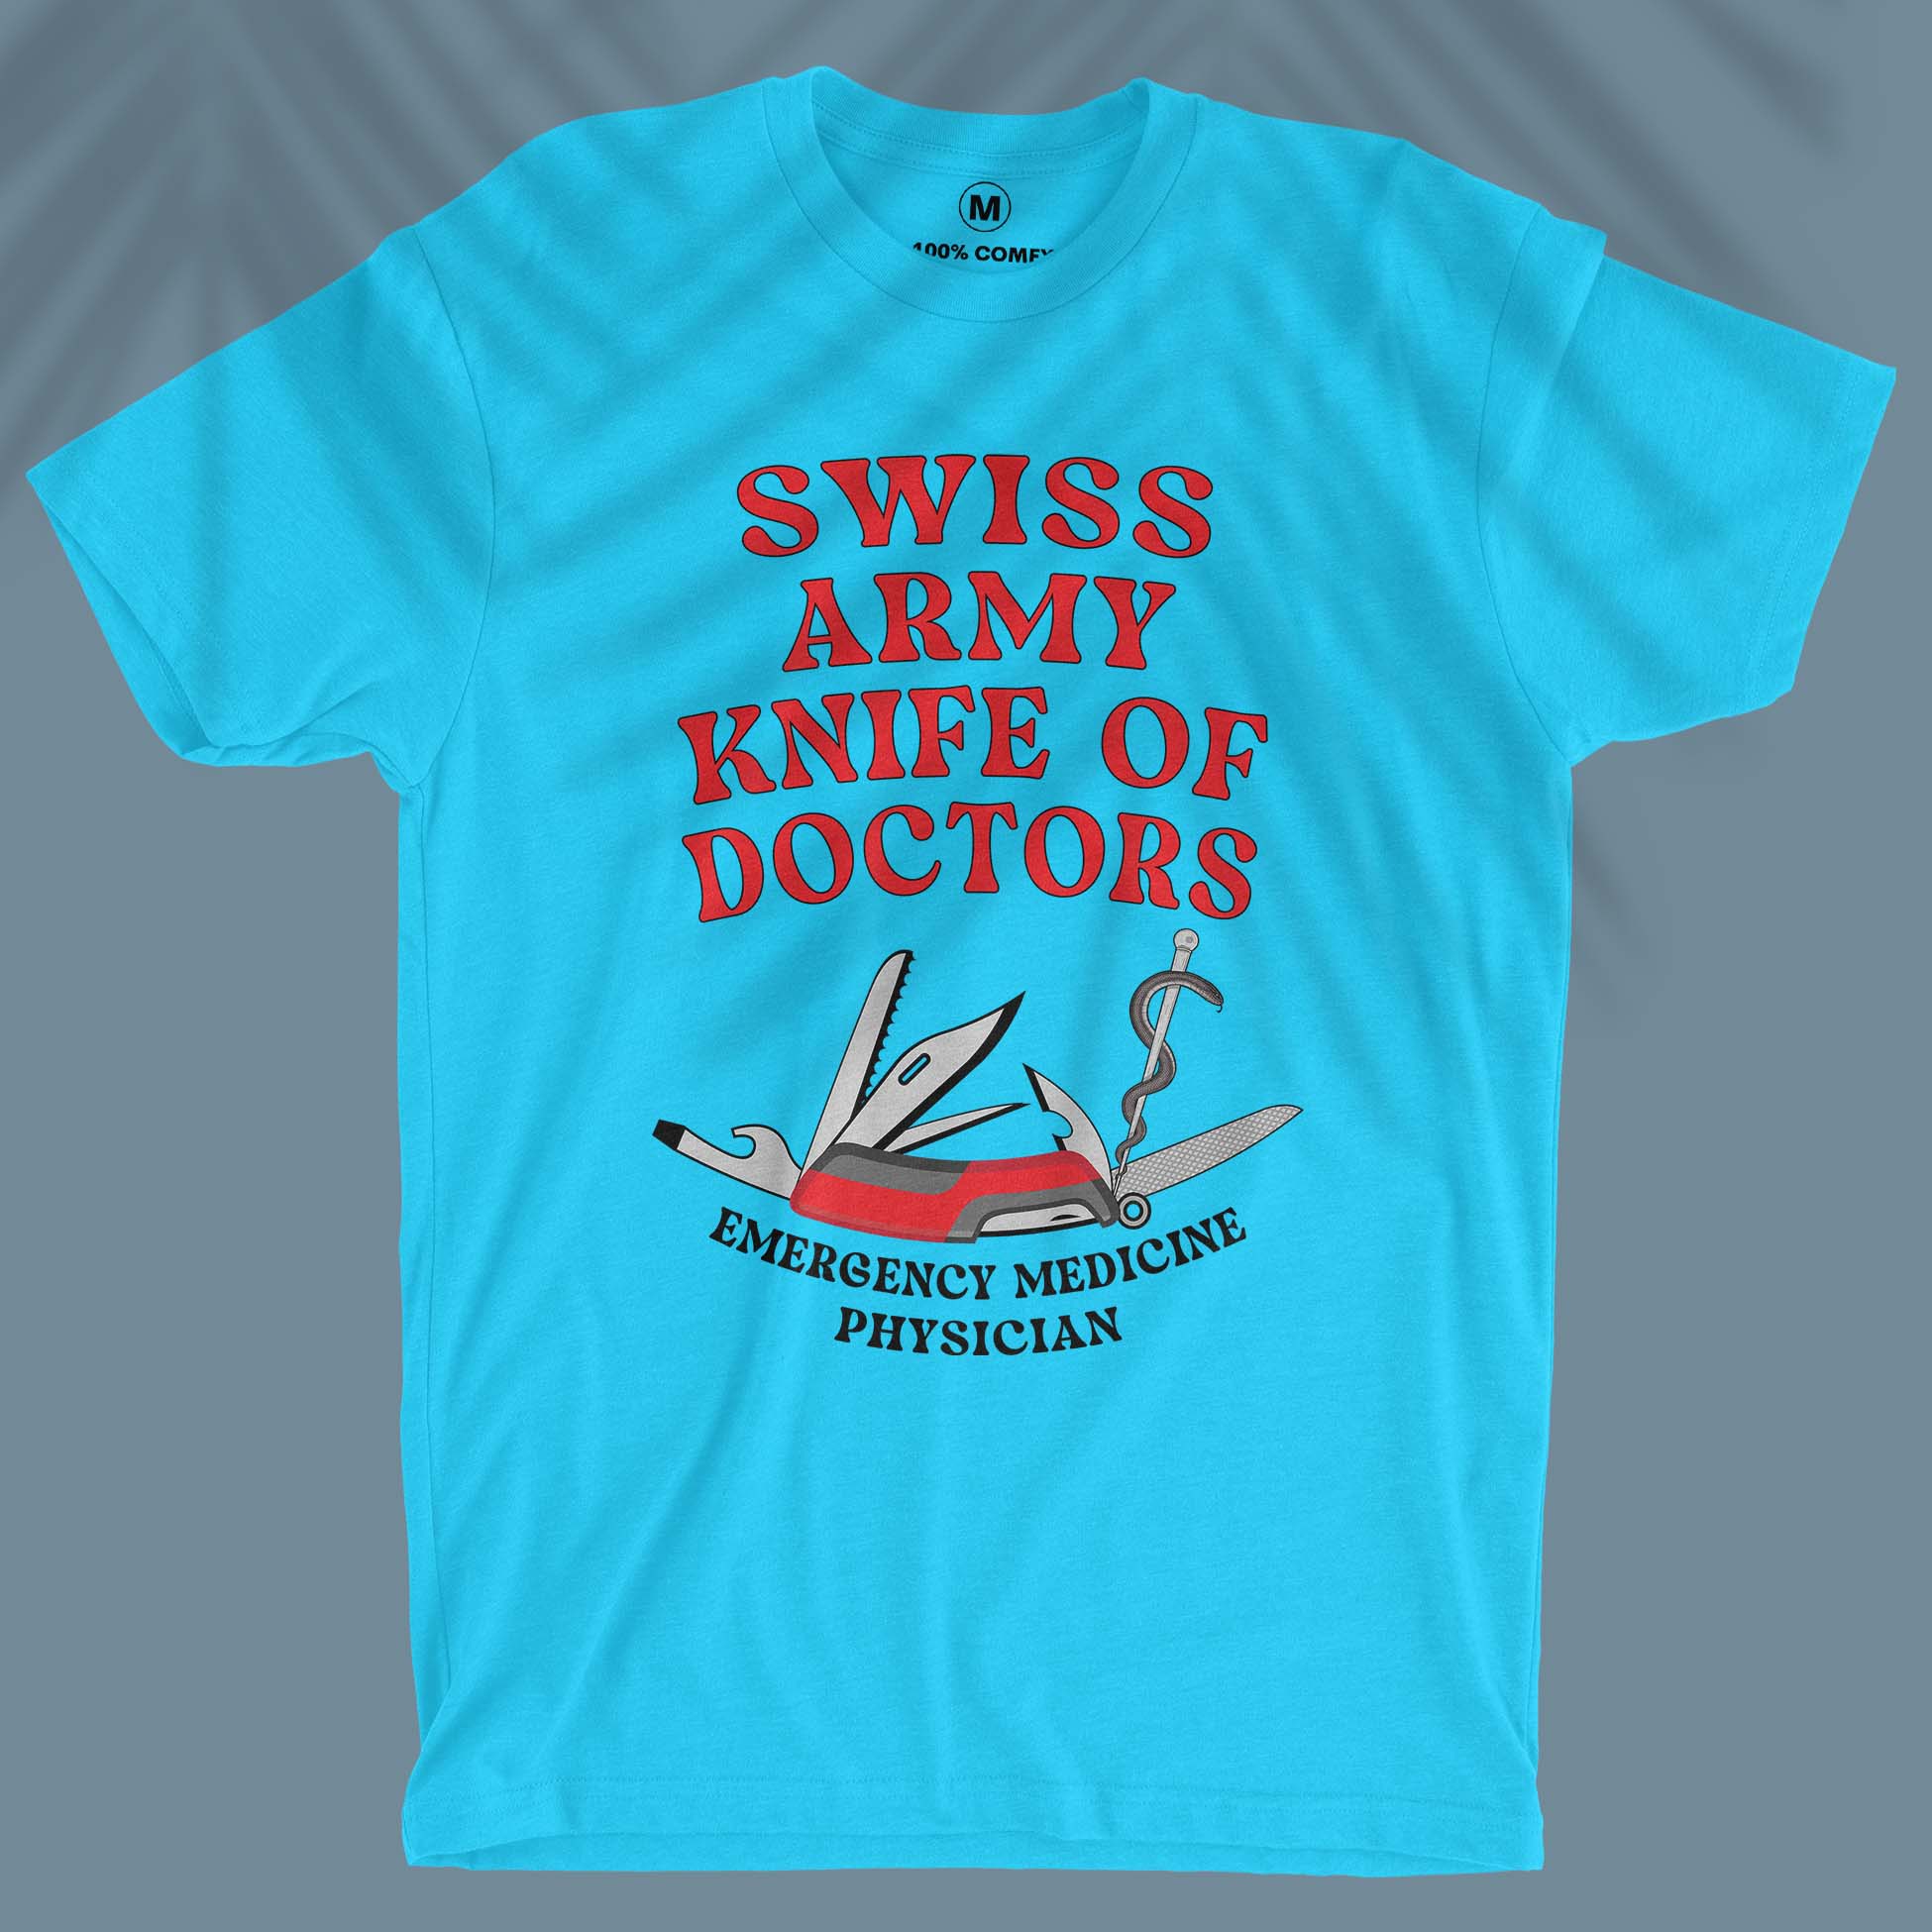 Swiss Army Knife Of Doctors - Emergency Medicine Physician - Unisex T-shirt